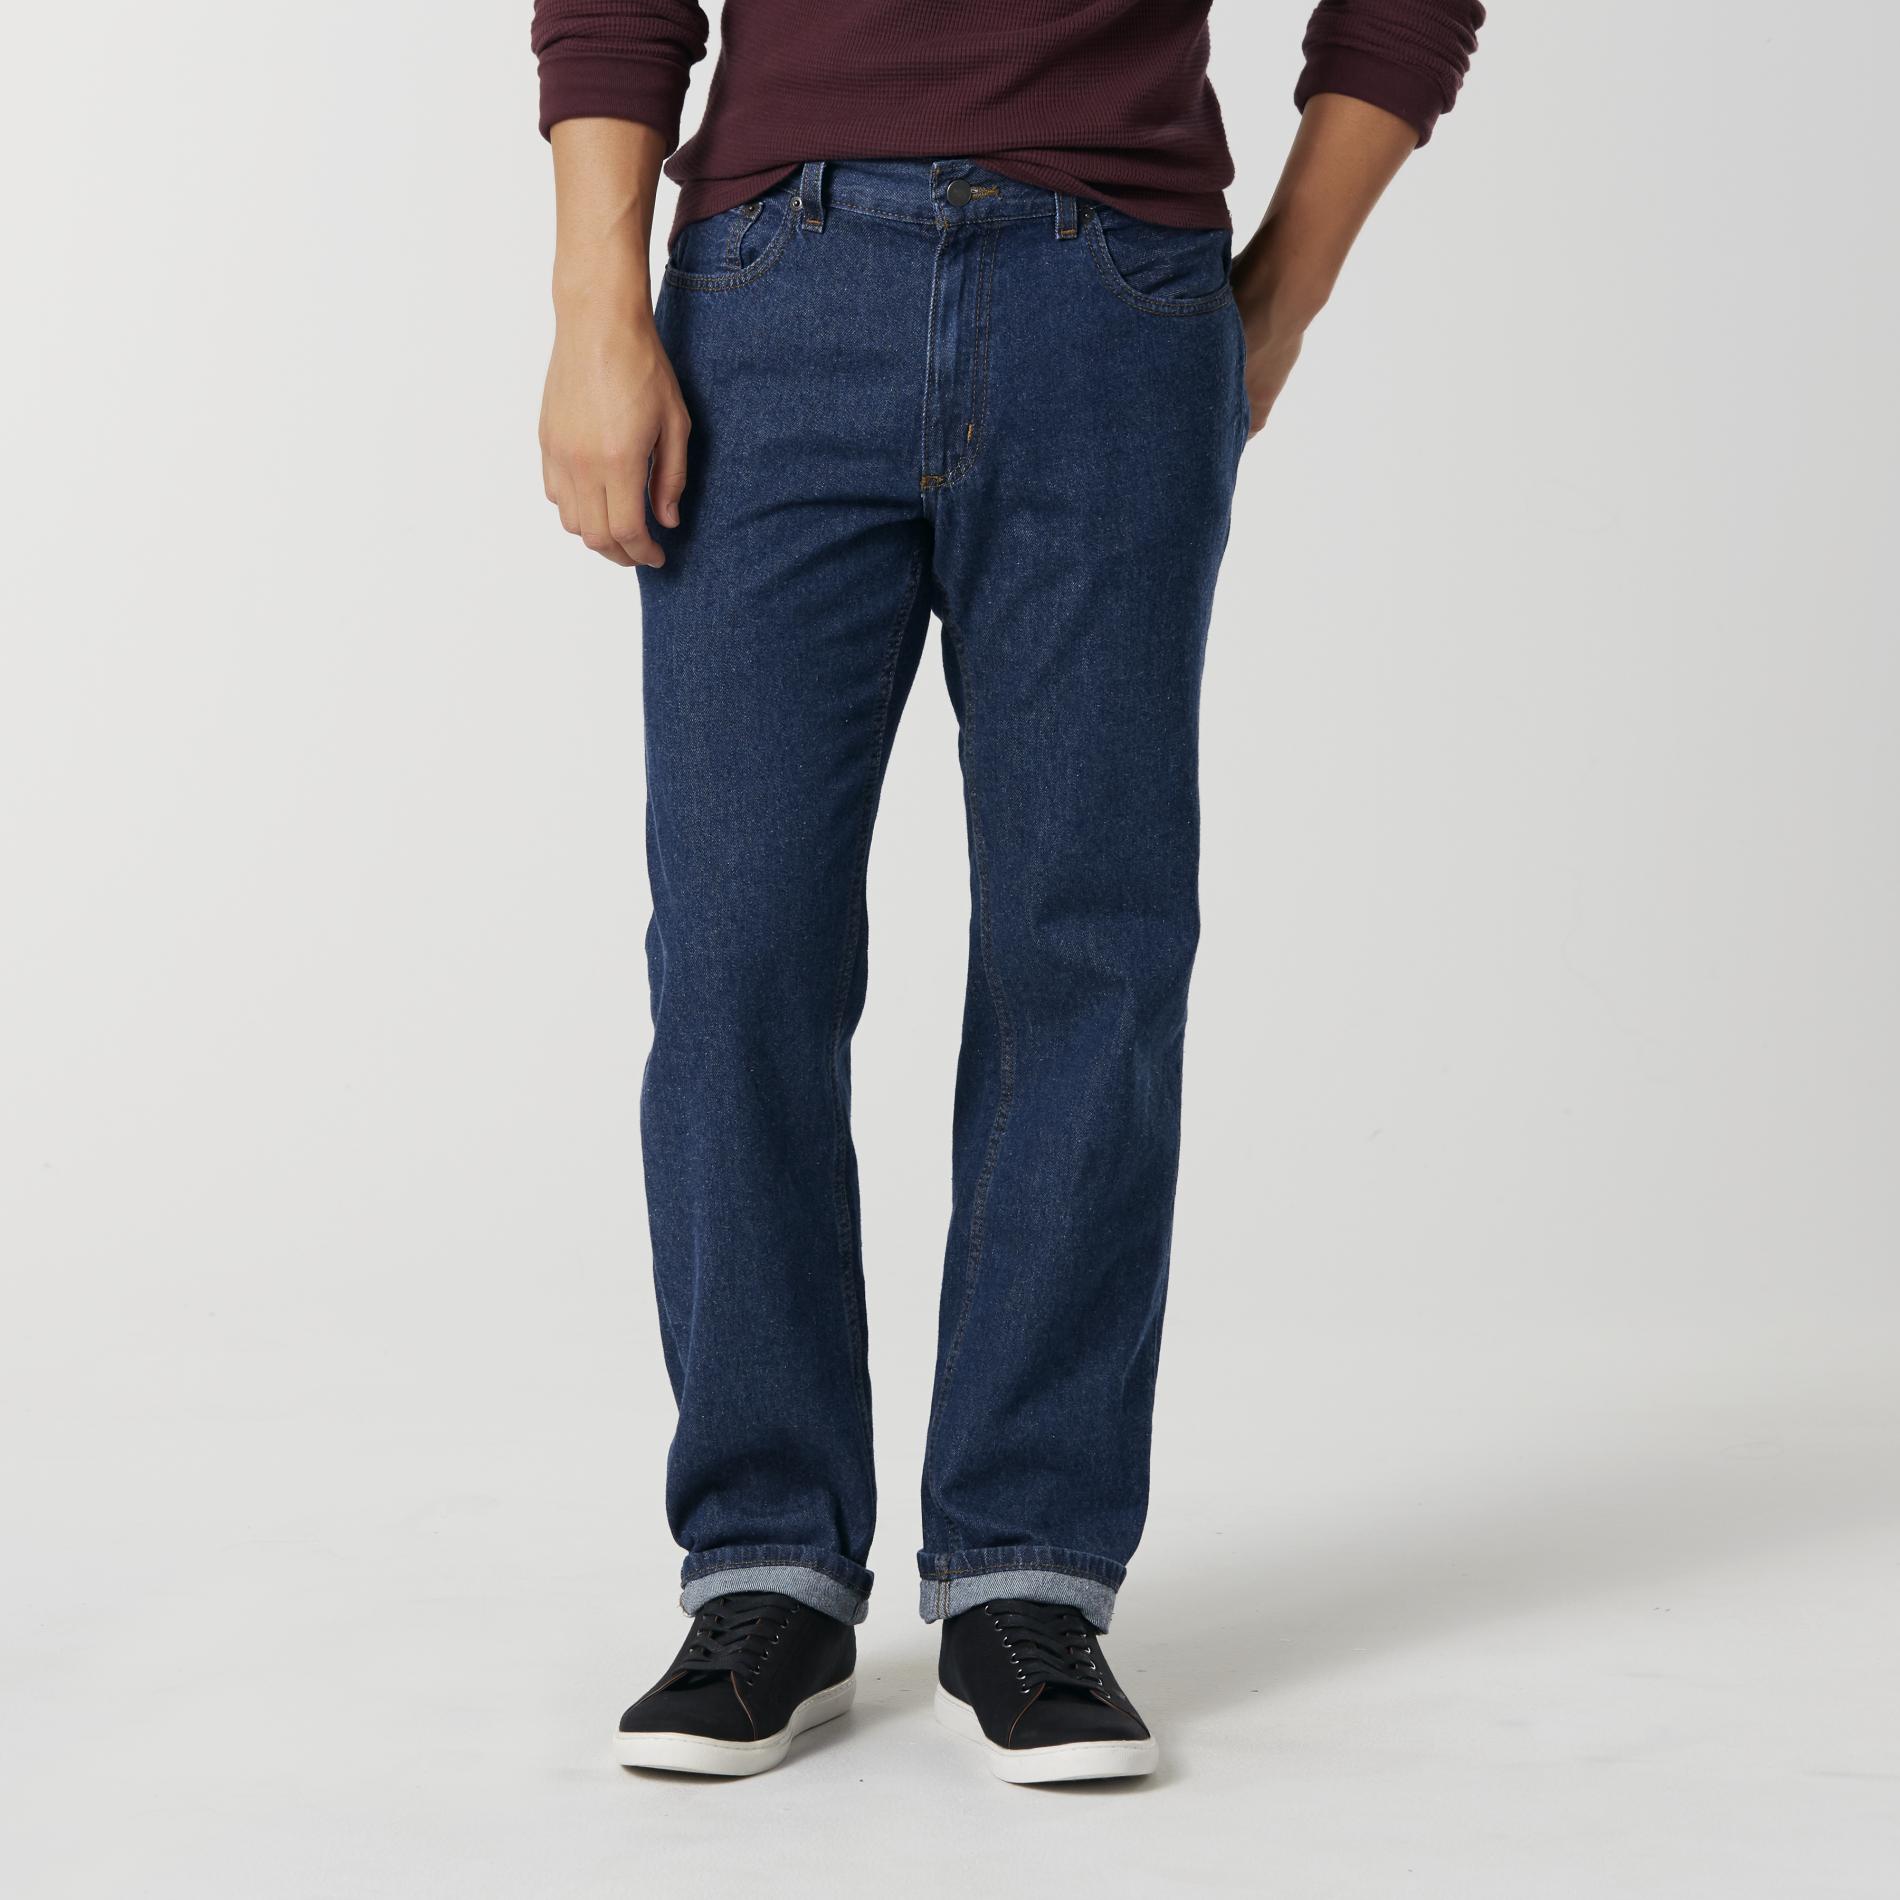 Roebuck & Co. Men's Relaxed Fit Straight Leg Jeans